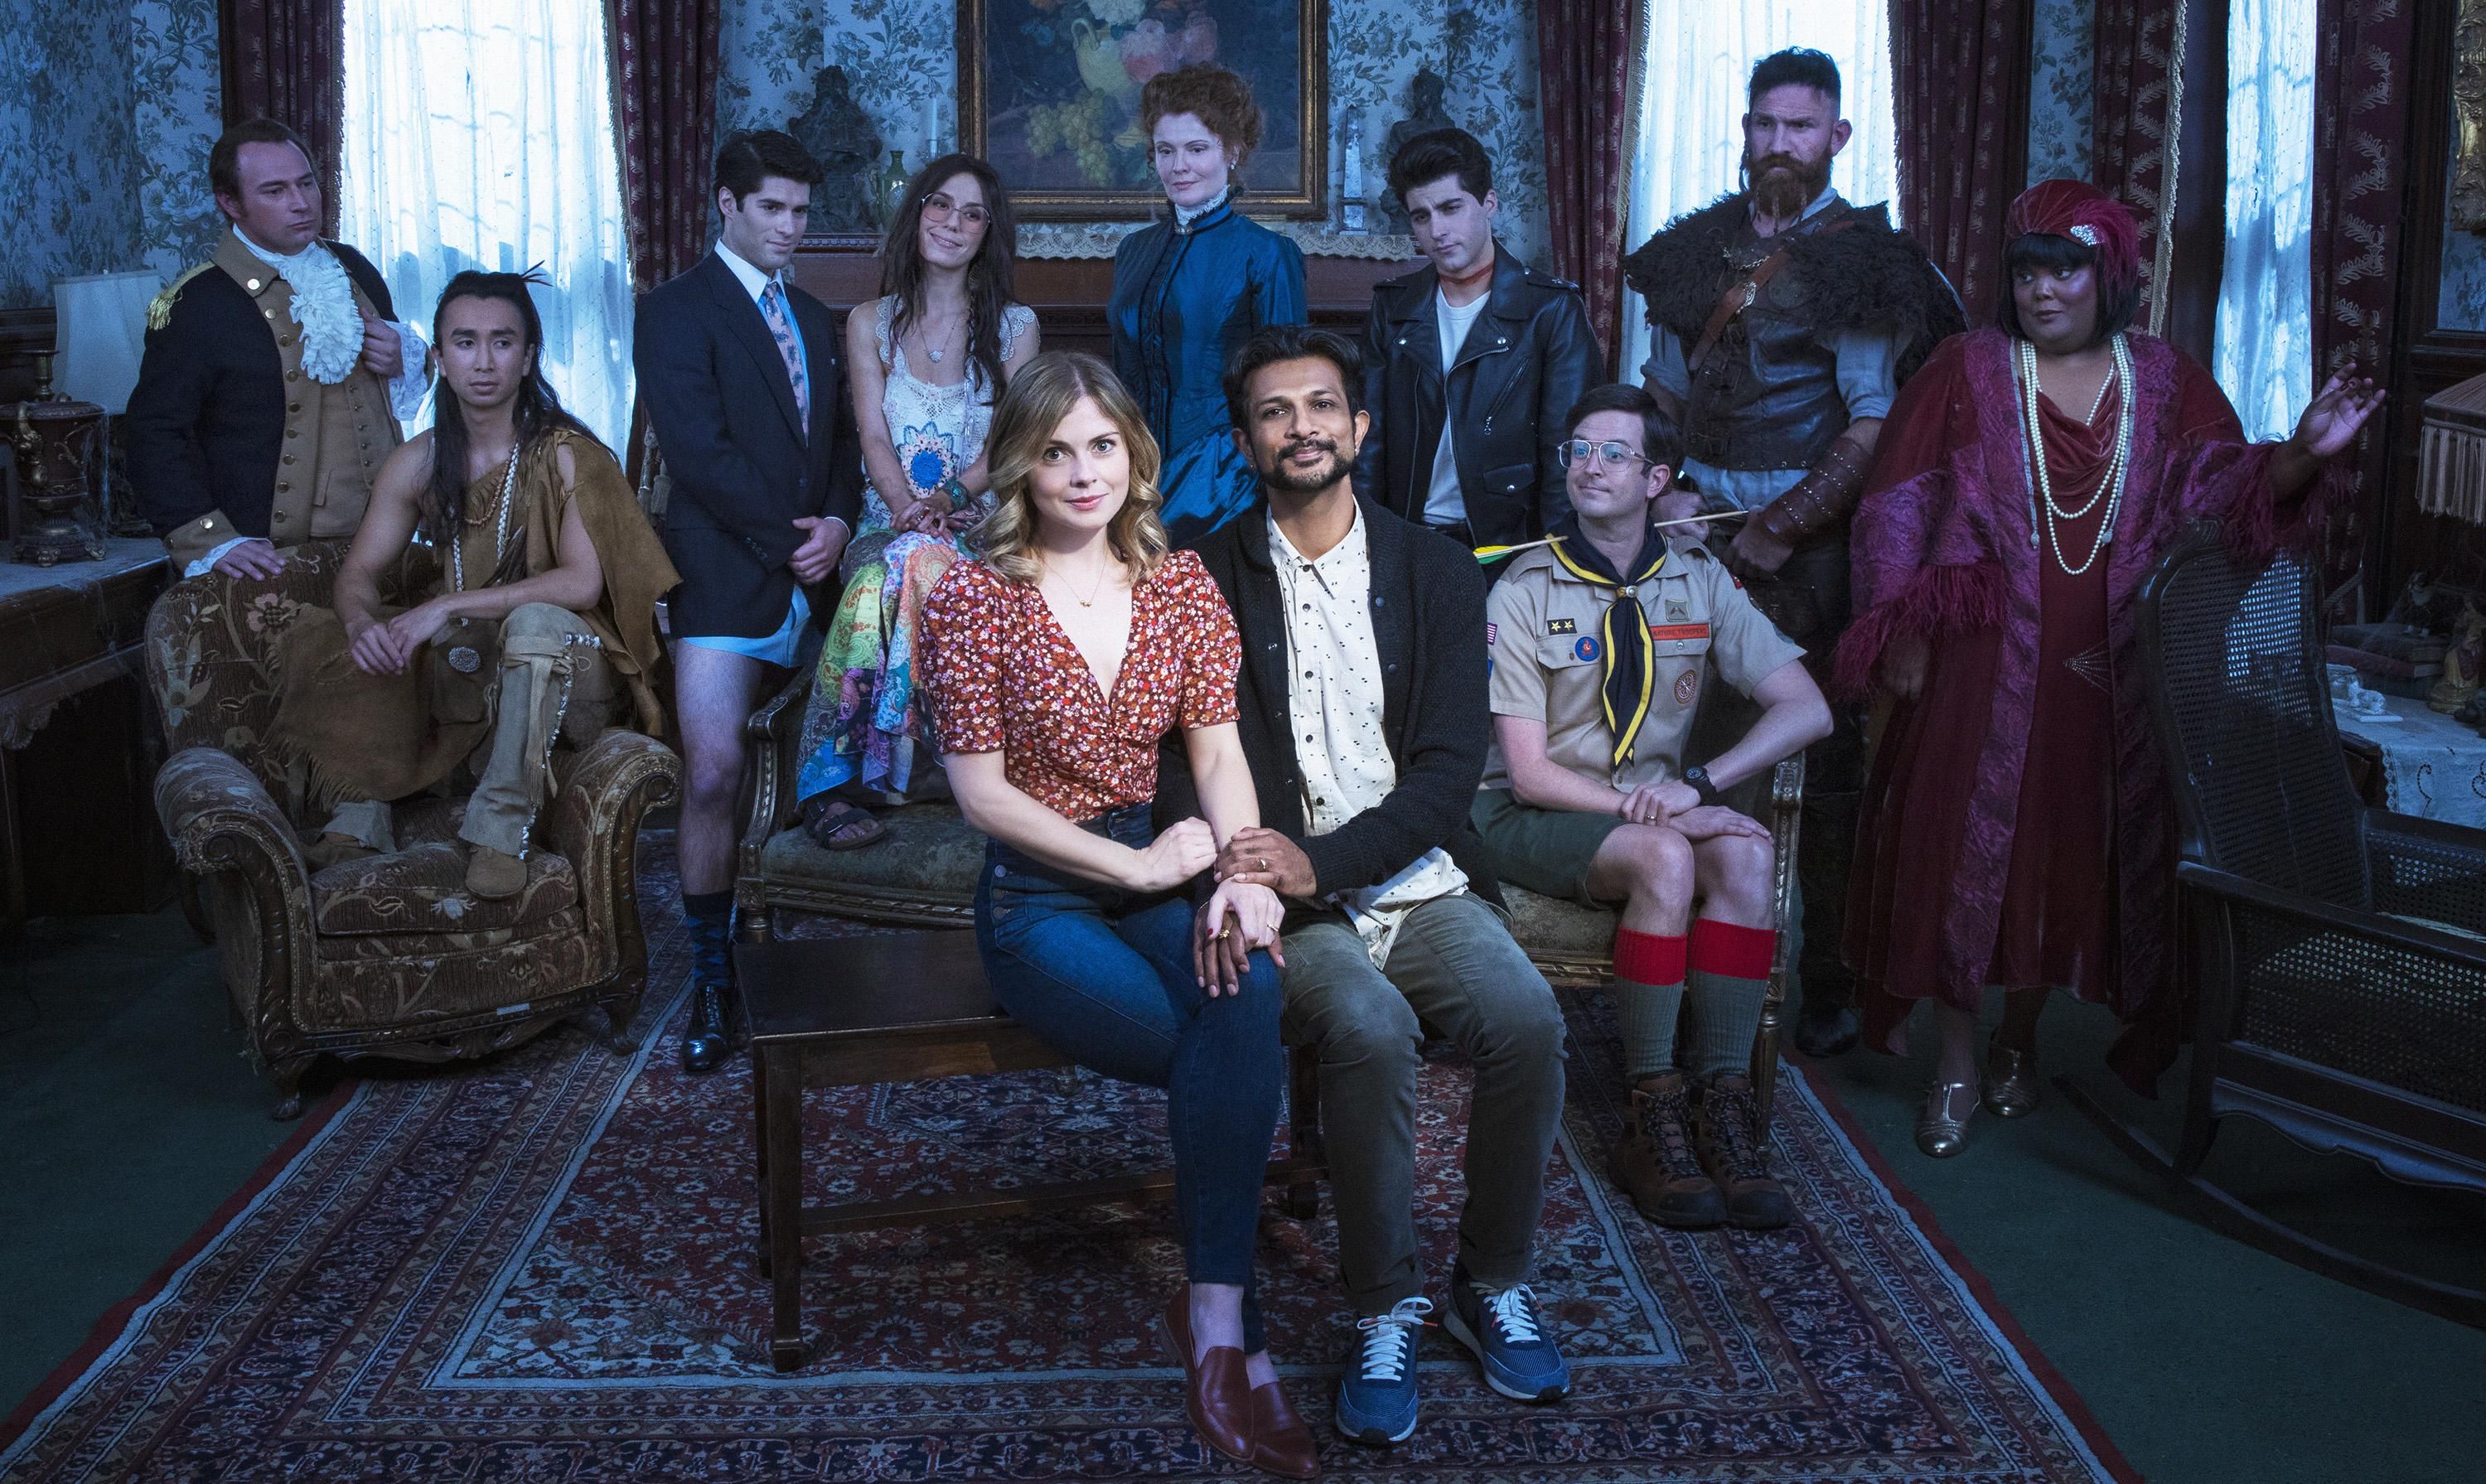 The cast of CBS's show Ghosts sits gathered in the salon of a dusty mansion.